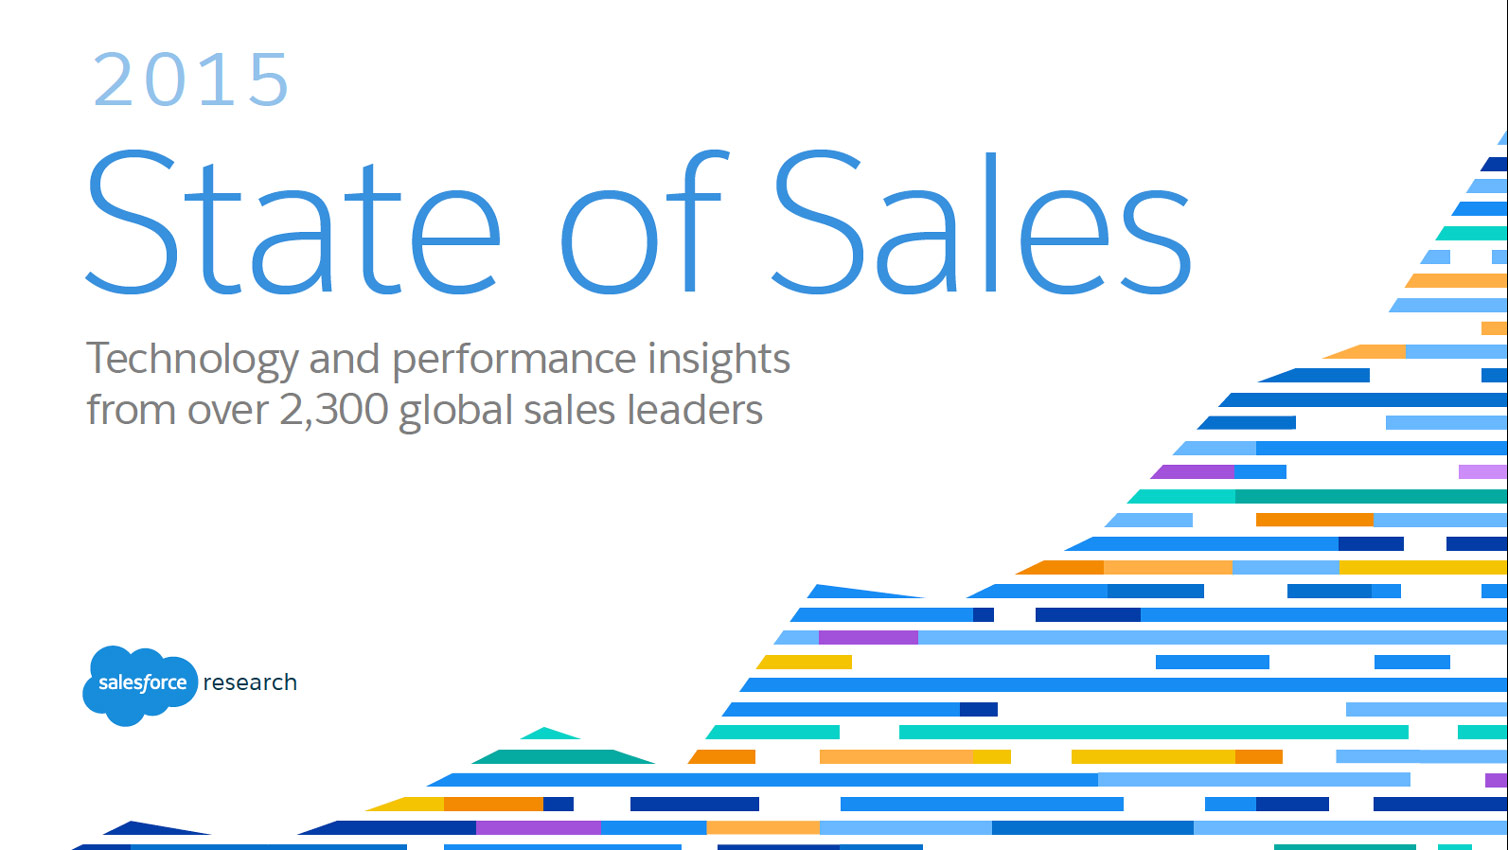 Salesforce reveals the top trends that fuel future sales performance